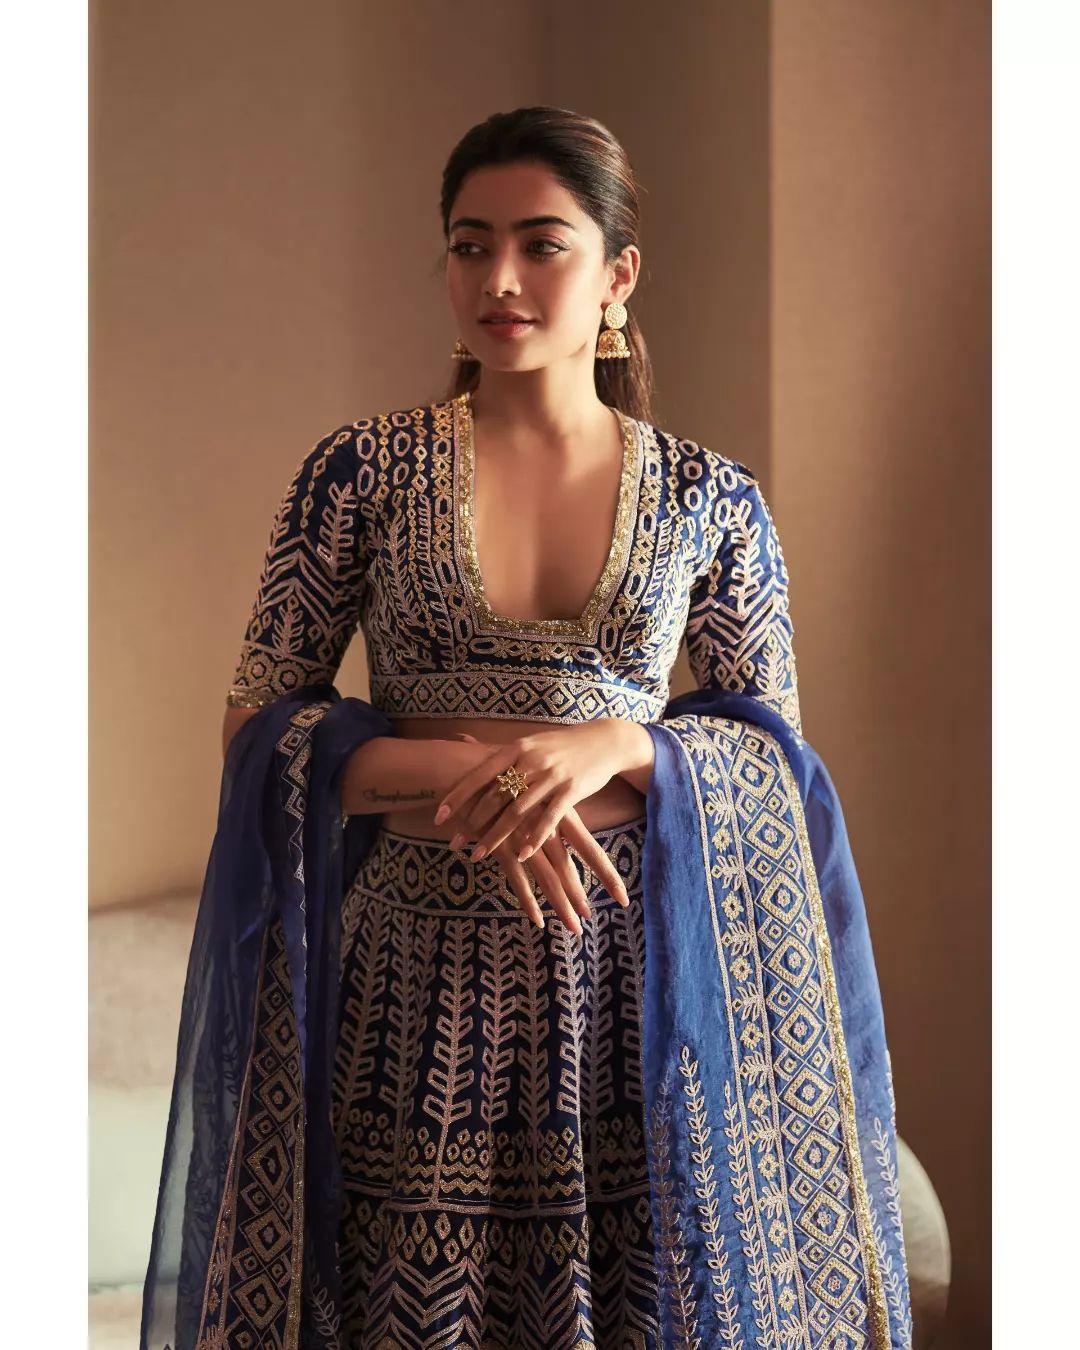 Get into the spirit of Chaitra Navratri by opting for a stunning dark blue lehenga decorated with intricate dori work featuring both floral and geometric designs.